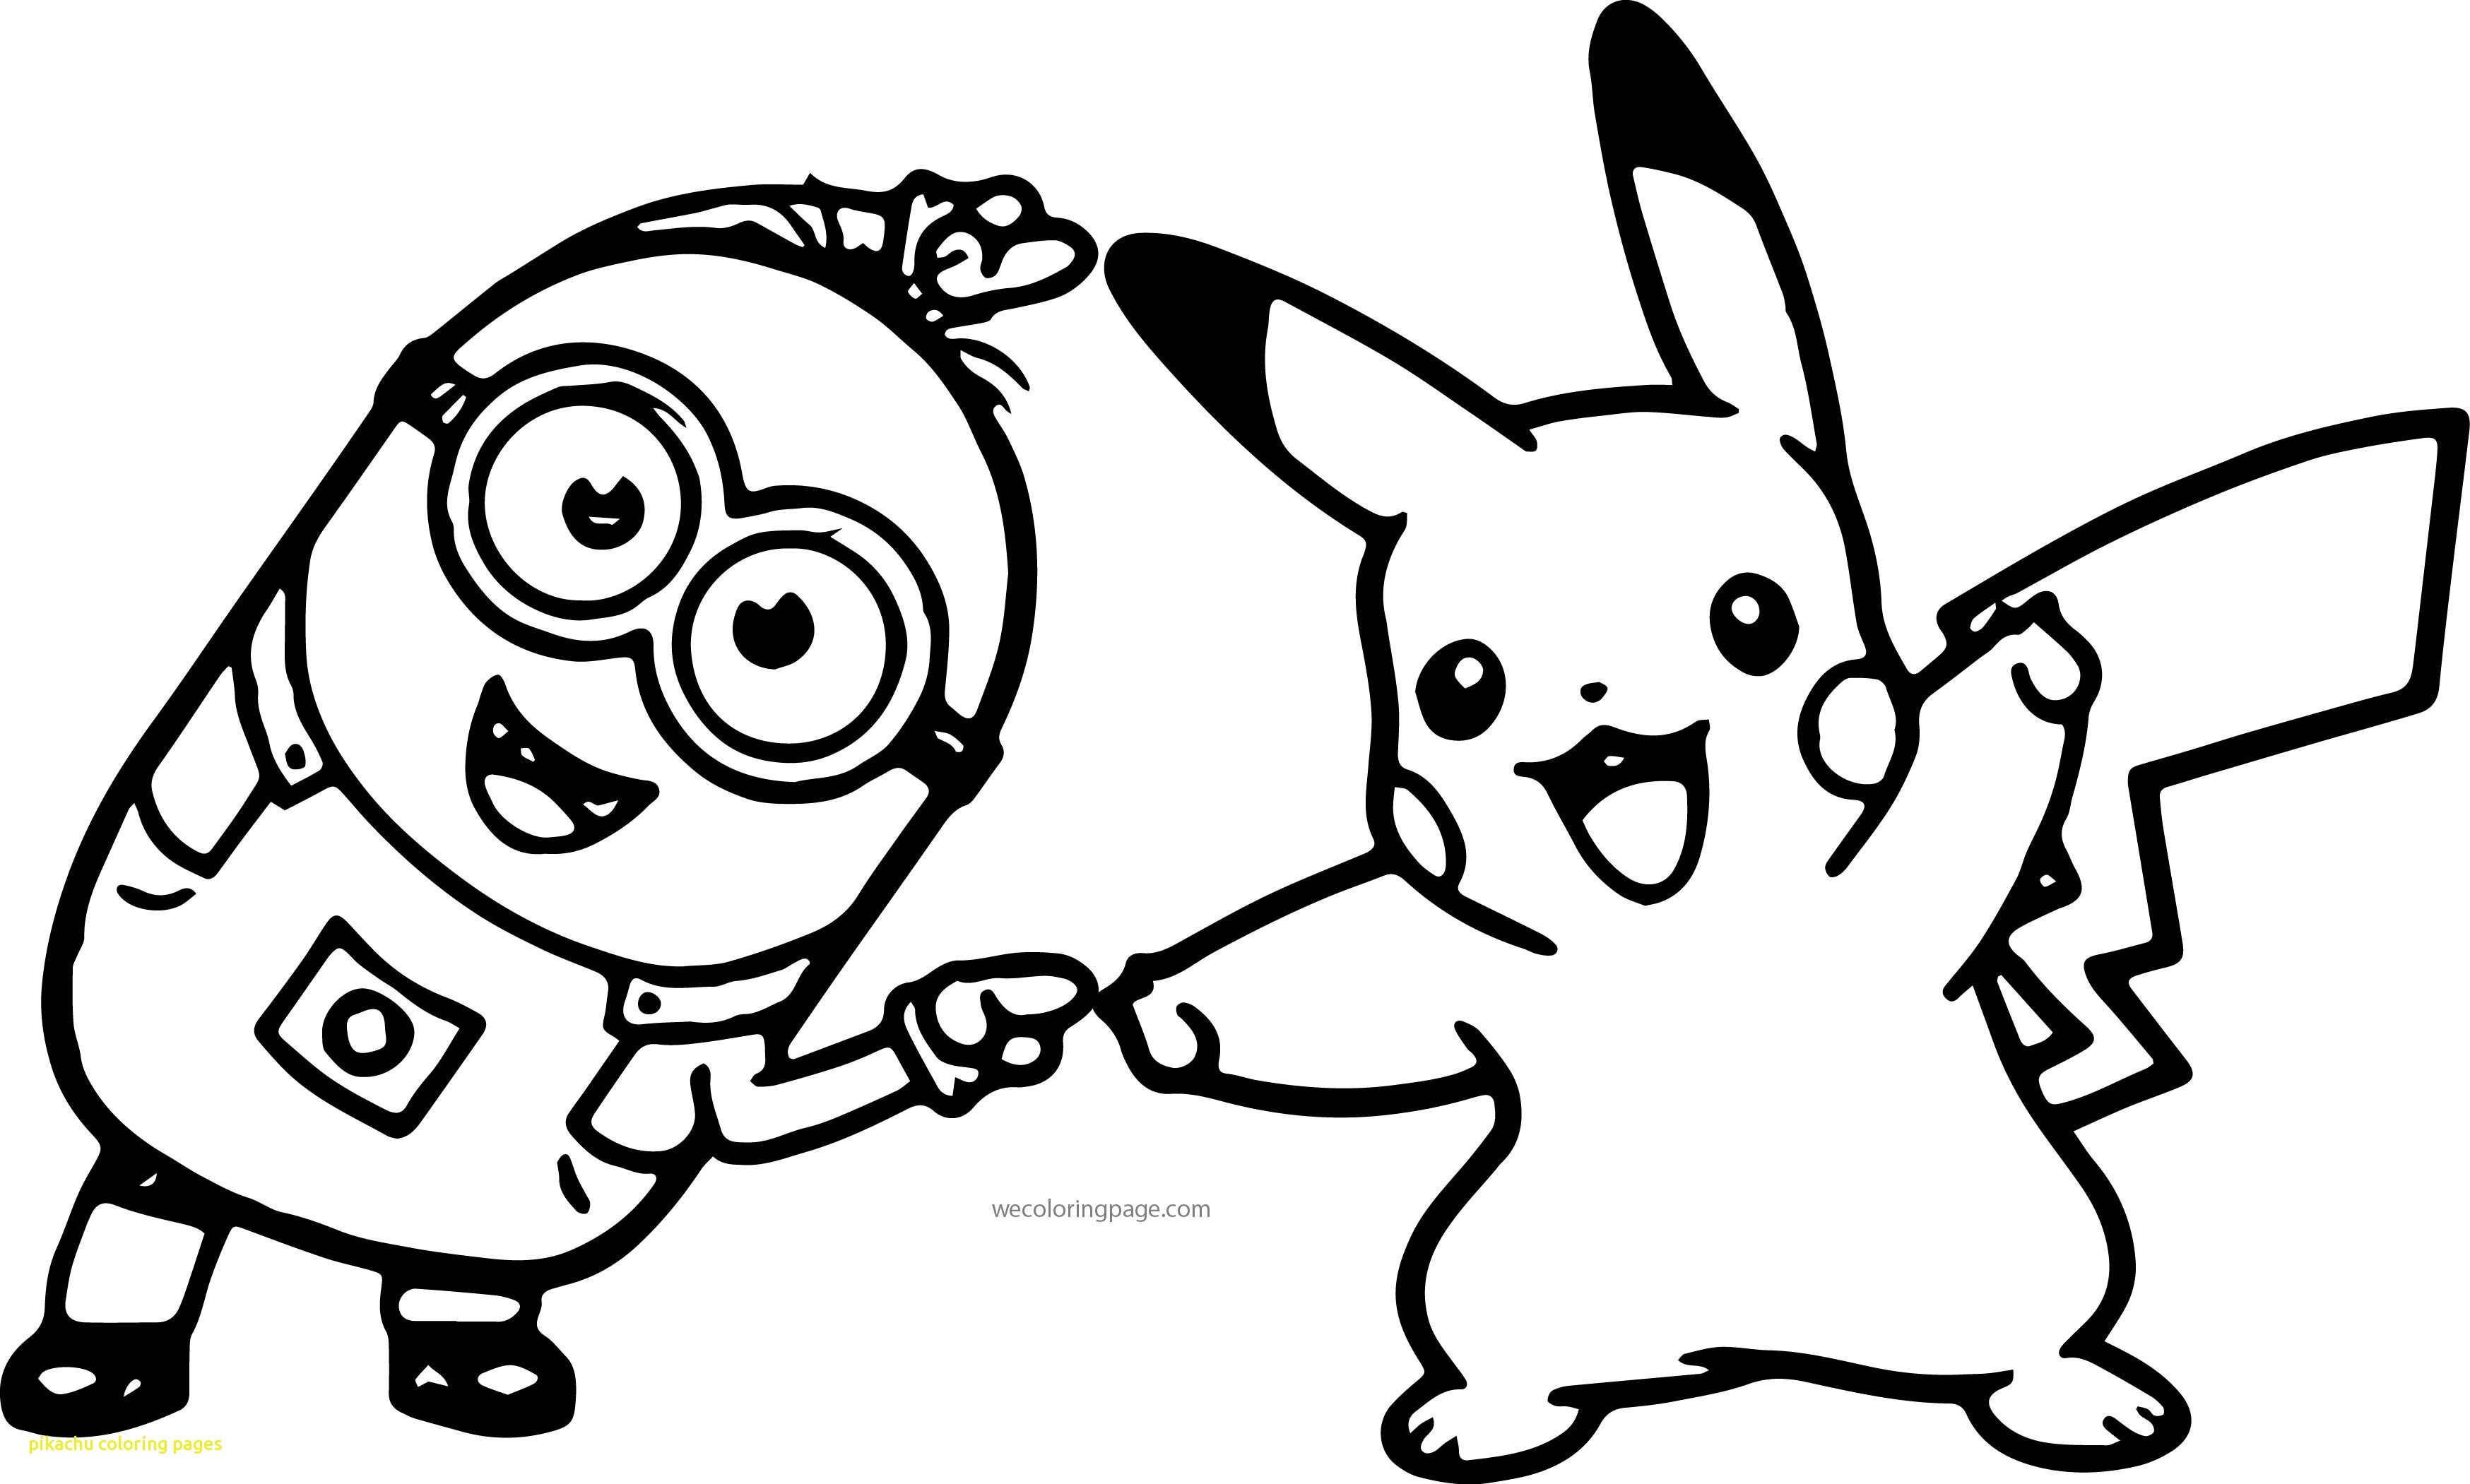 Minion and Pikachu Coloring Page